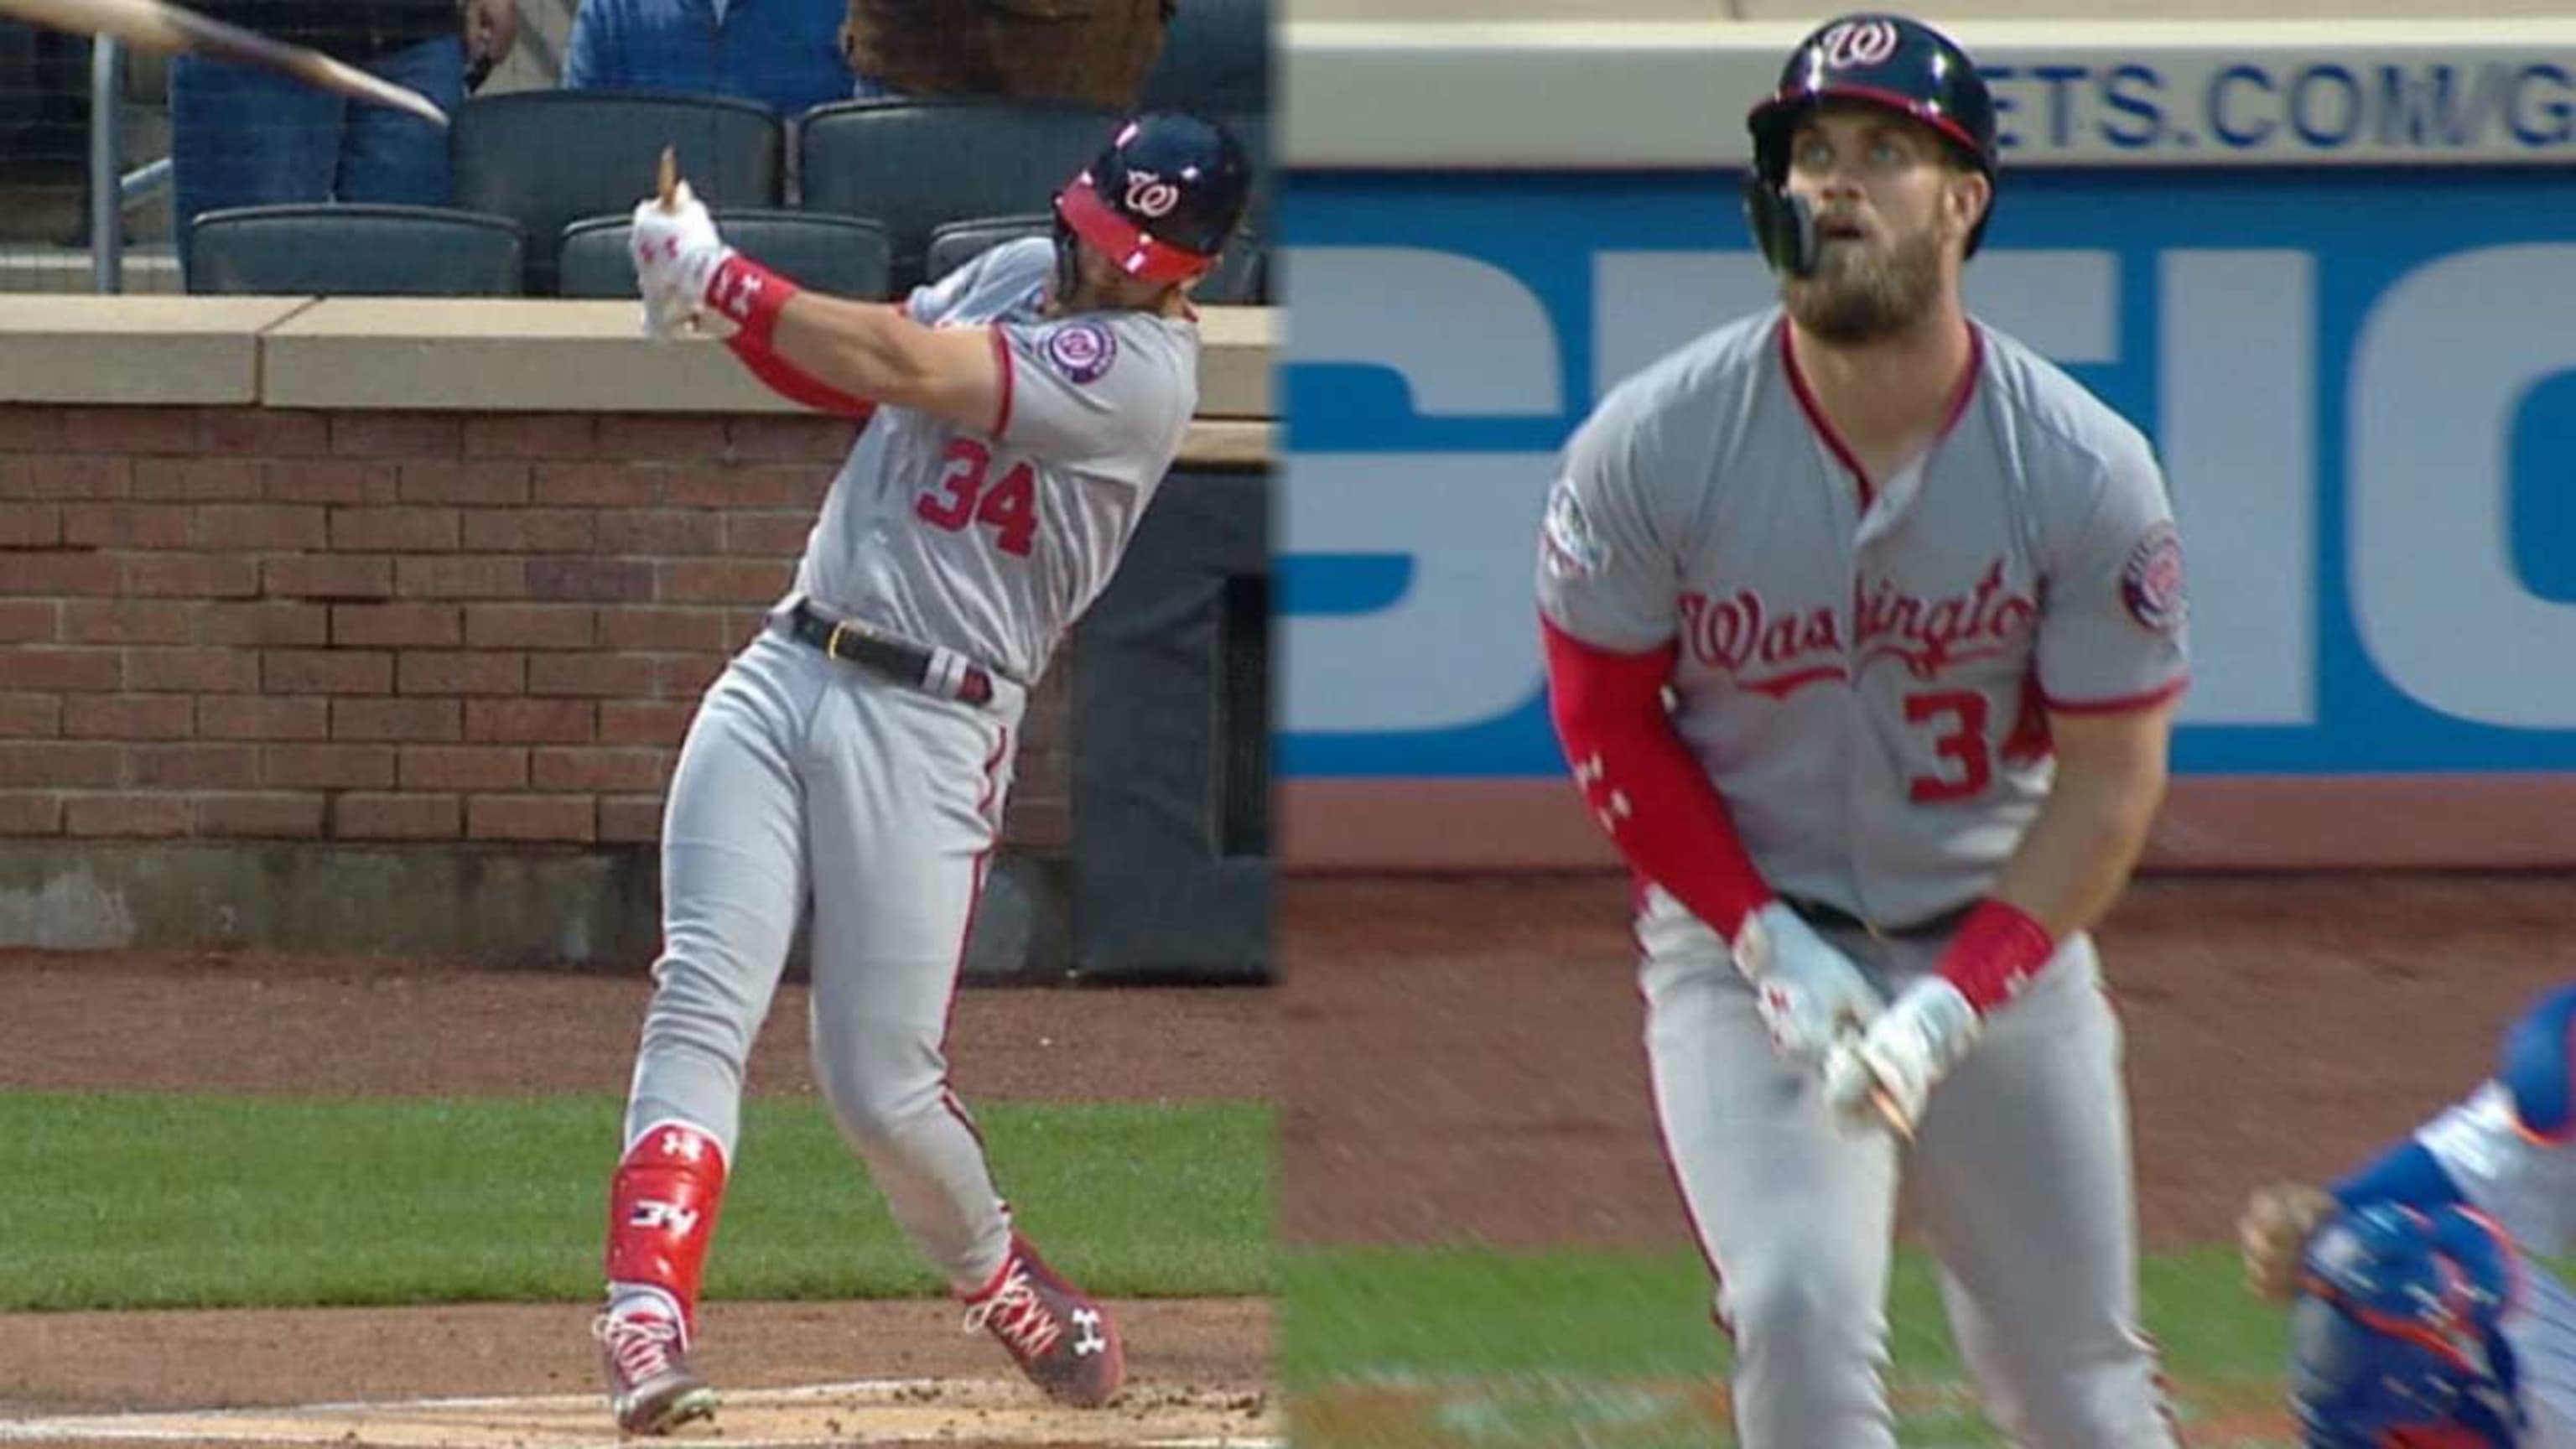 Bryce Harper crushed a home run in his first rehab at-bat. How many more  does he really need?